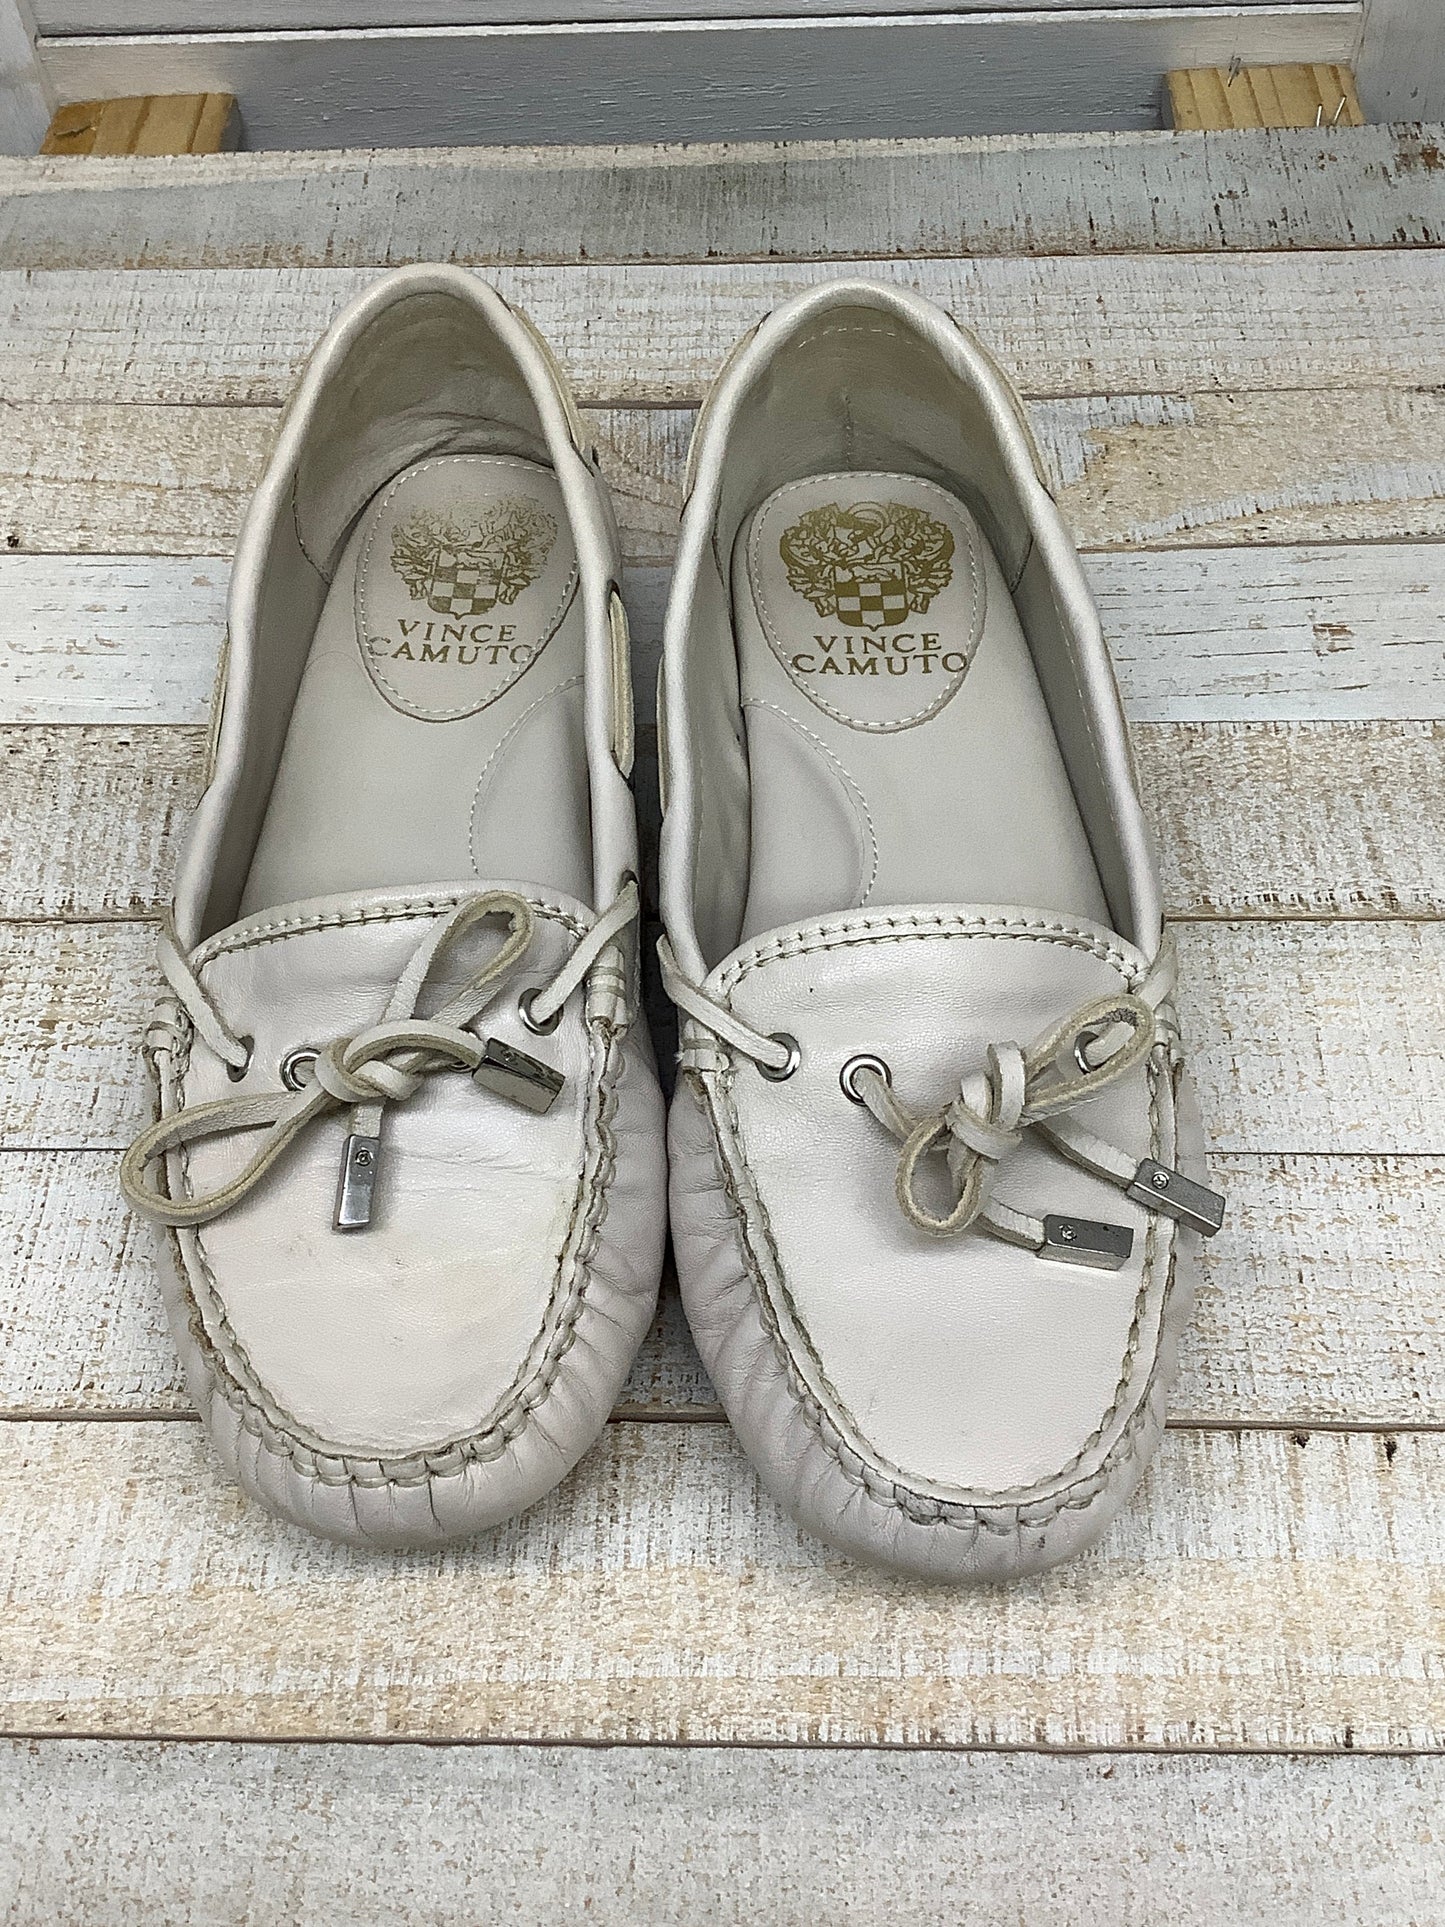 Shoes Flats Loafer Oxford By Vince Camuto  Size: 6.5